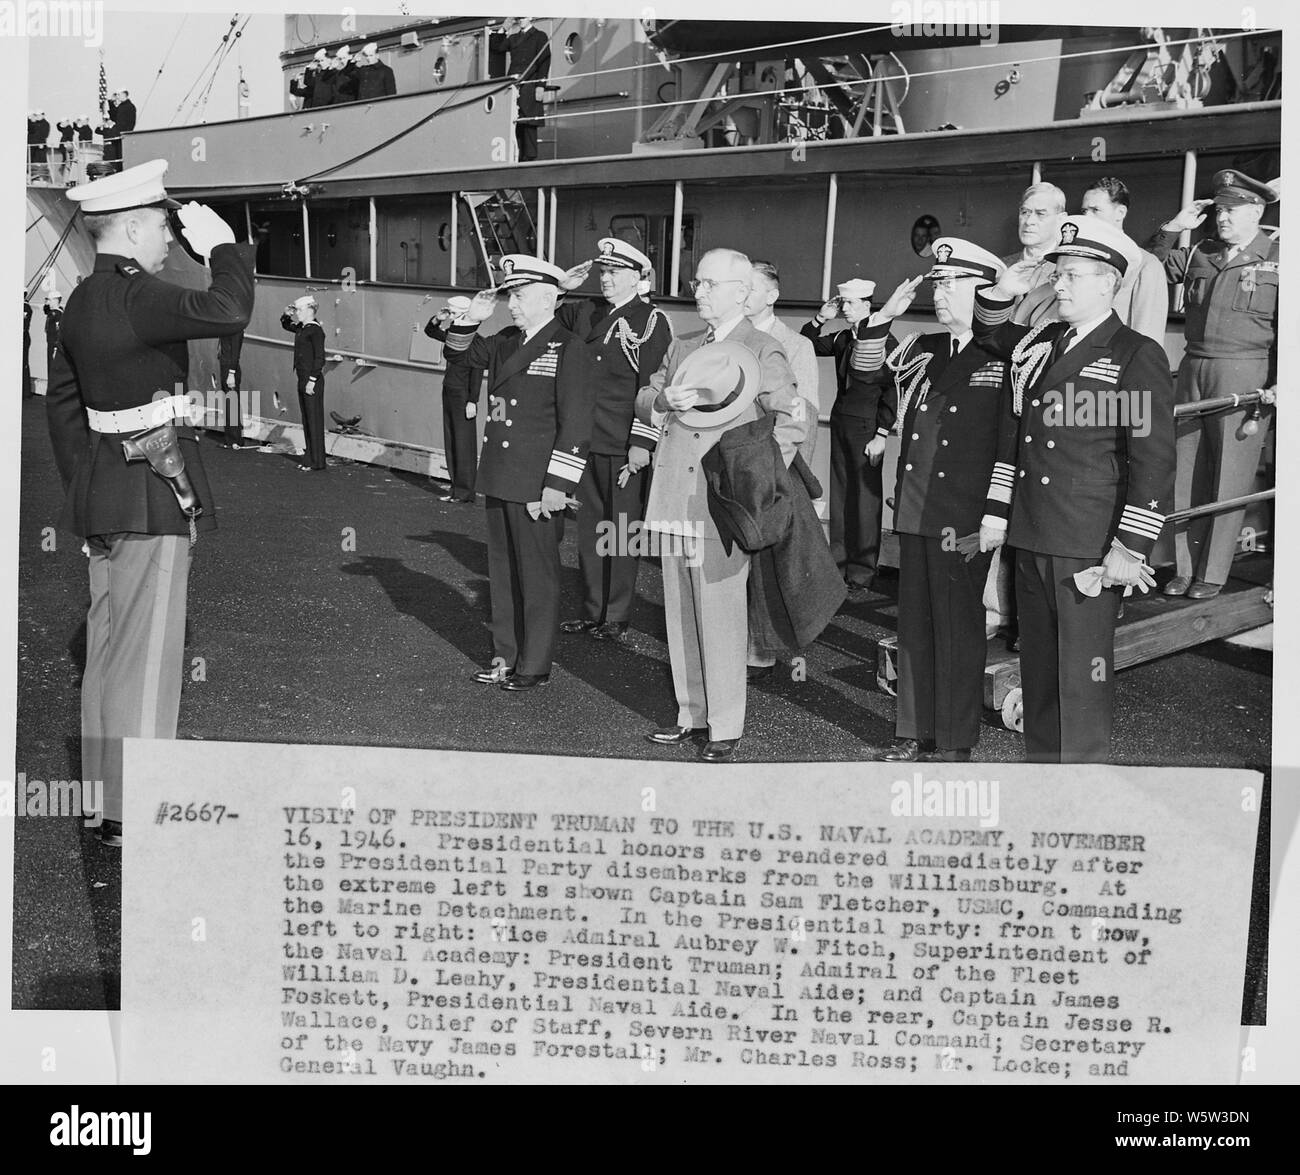 Photograph of President Truman and his party receiving honors as they disembark from the President's yacht, the U.S.S. WILLIAMSBURG, at the U.S. Naval Academy: (left to right) Captain Sam Fletcher, USMC; Vice Admiral Aubrey Fitch, Superintendent of the Naval Academy; Captain Jesse Wallace, Chief of Staff, Severn River Naval Command; the President; Secretary of the Navy James Forrestal (partially obscured) Fleet Admiral William Leahy; Press Secretary Charles Ross; Captain James Foskett, Naval Aide to the President; White House aide Edwin Locke, Jr. (partially obscured); General Harry Vaughan, M Stock Photo